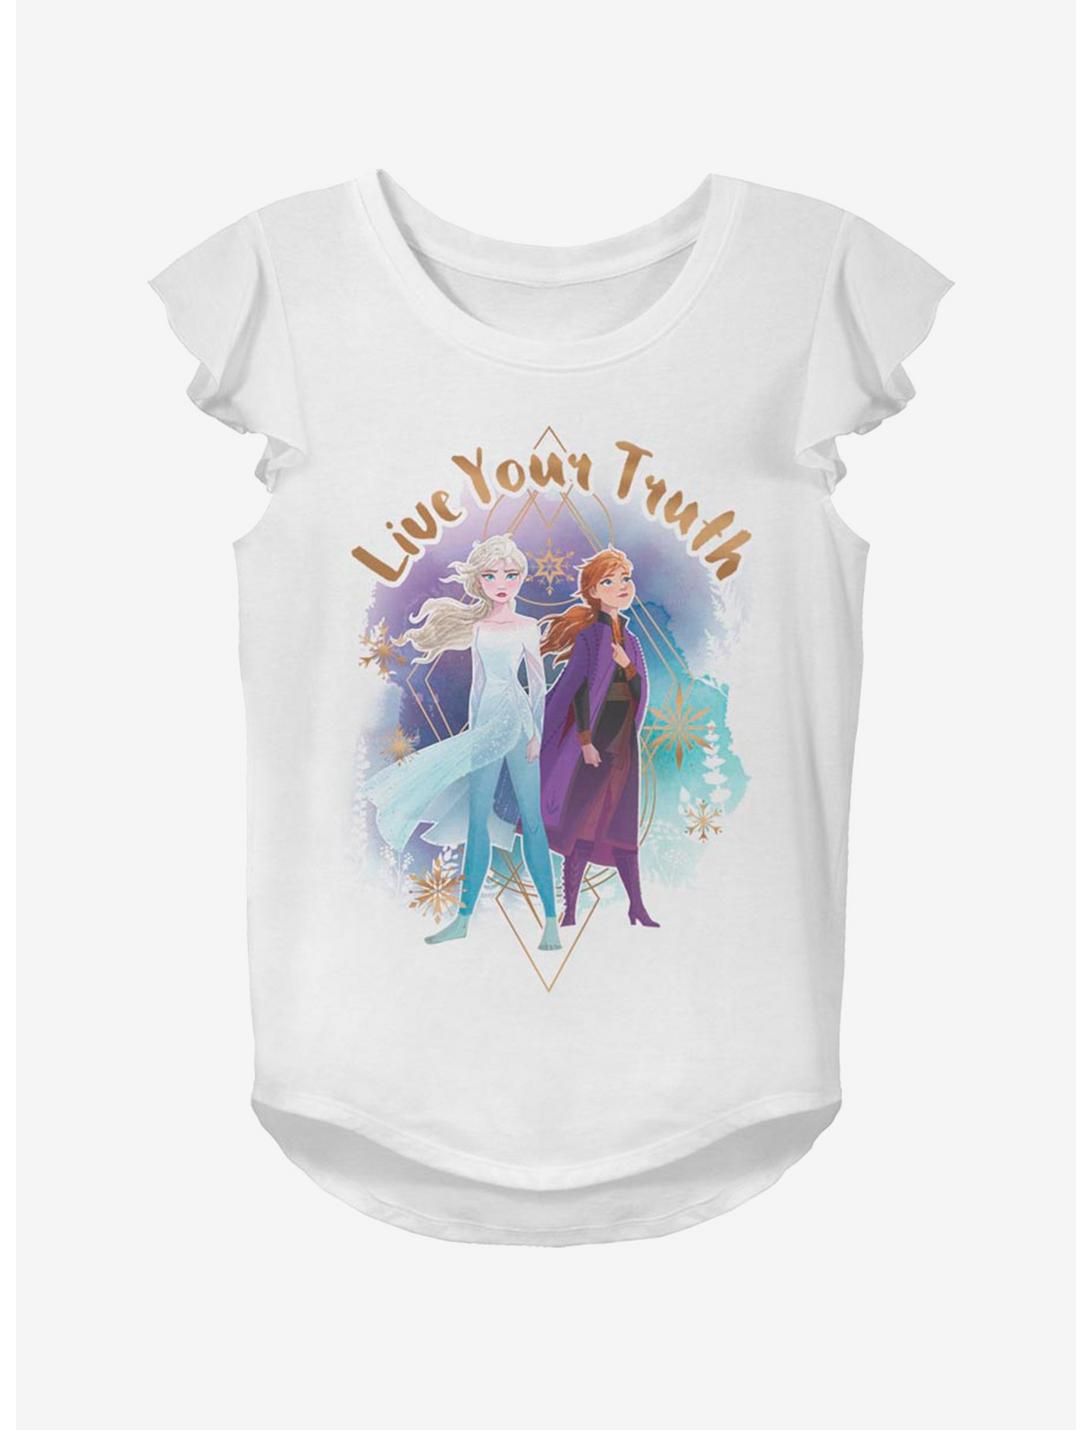 Disney Frozen 2 Live Your Truth Youth Girls Flutter Sleeve T-Shirt, WHITE, hi-res